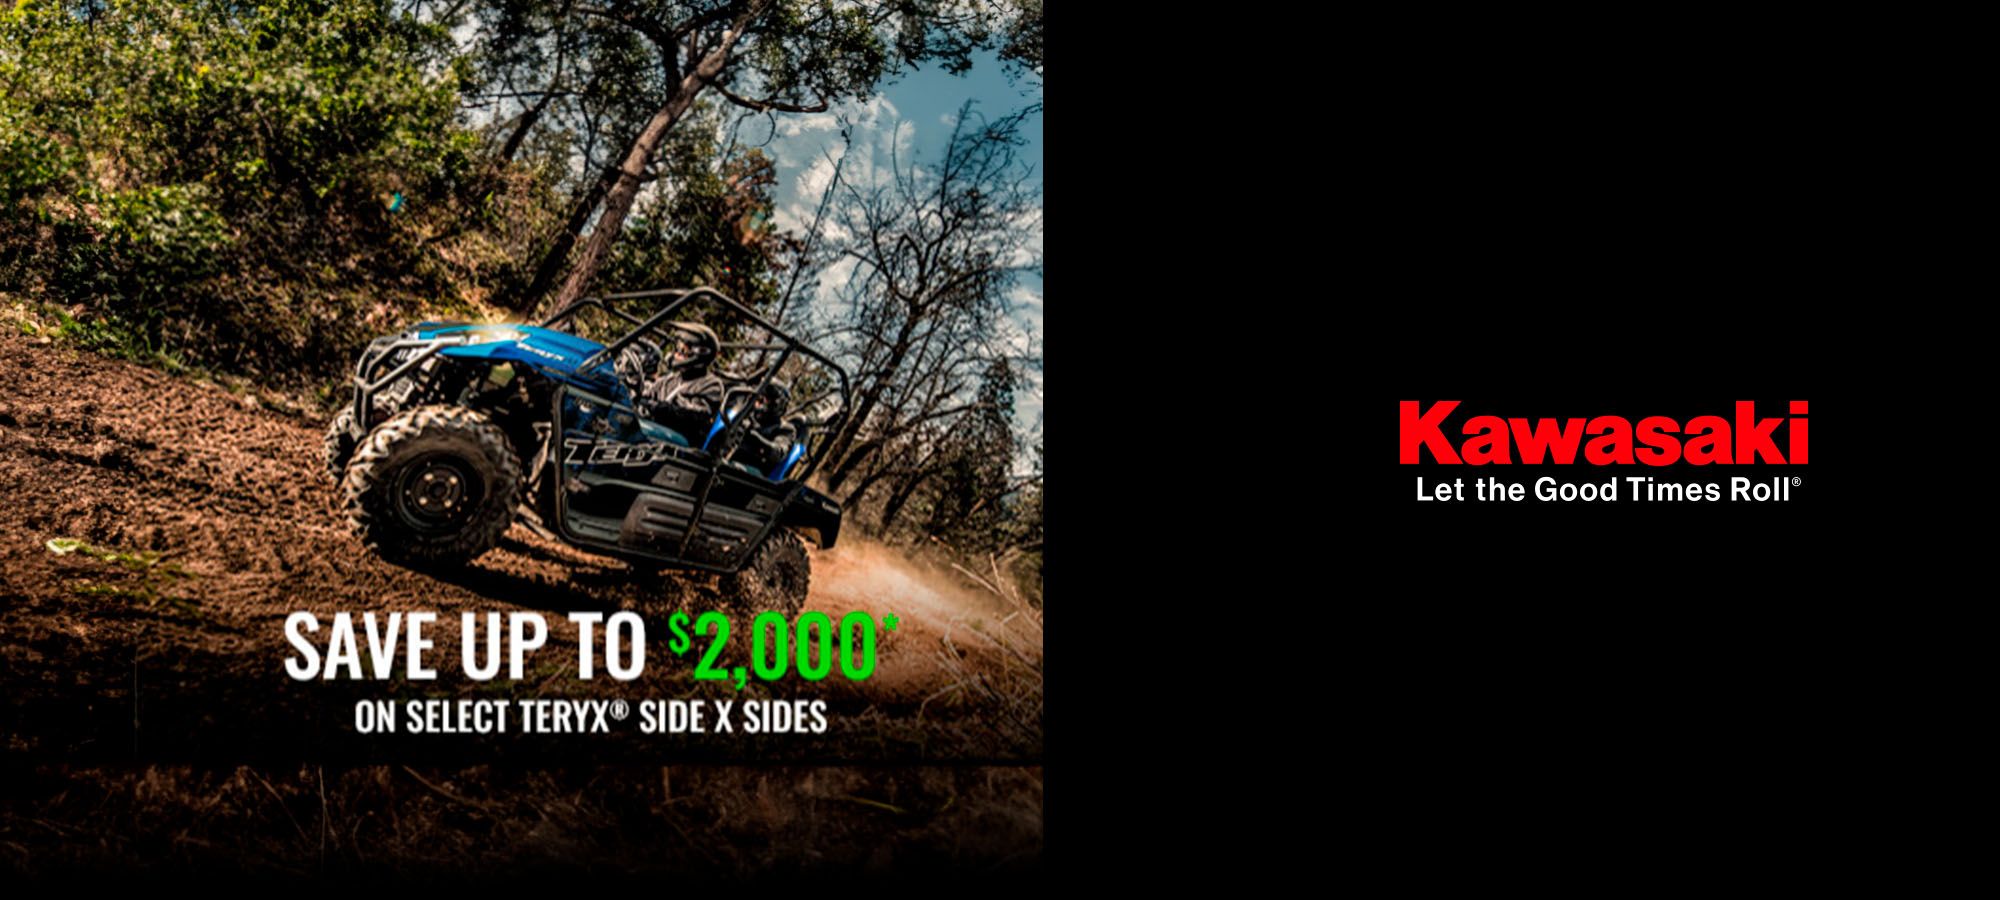 Kawasaki US - Save Up to $2,000* On Select Side X Sides at Brenny's Motorcycle Clinic, Bettendorf, IA 52722